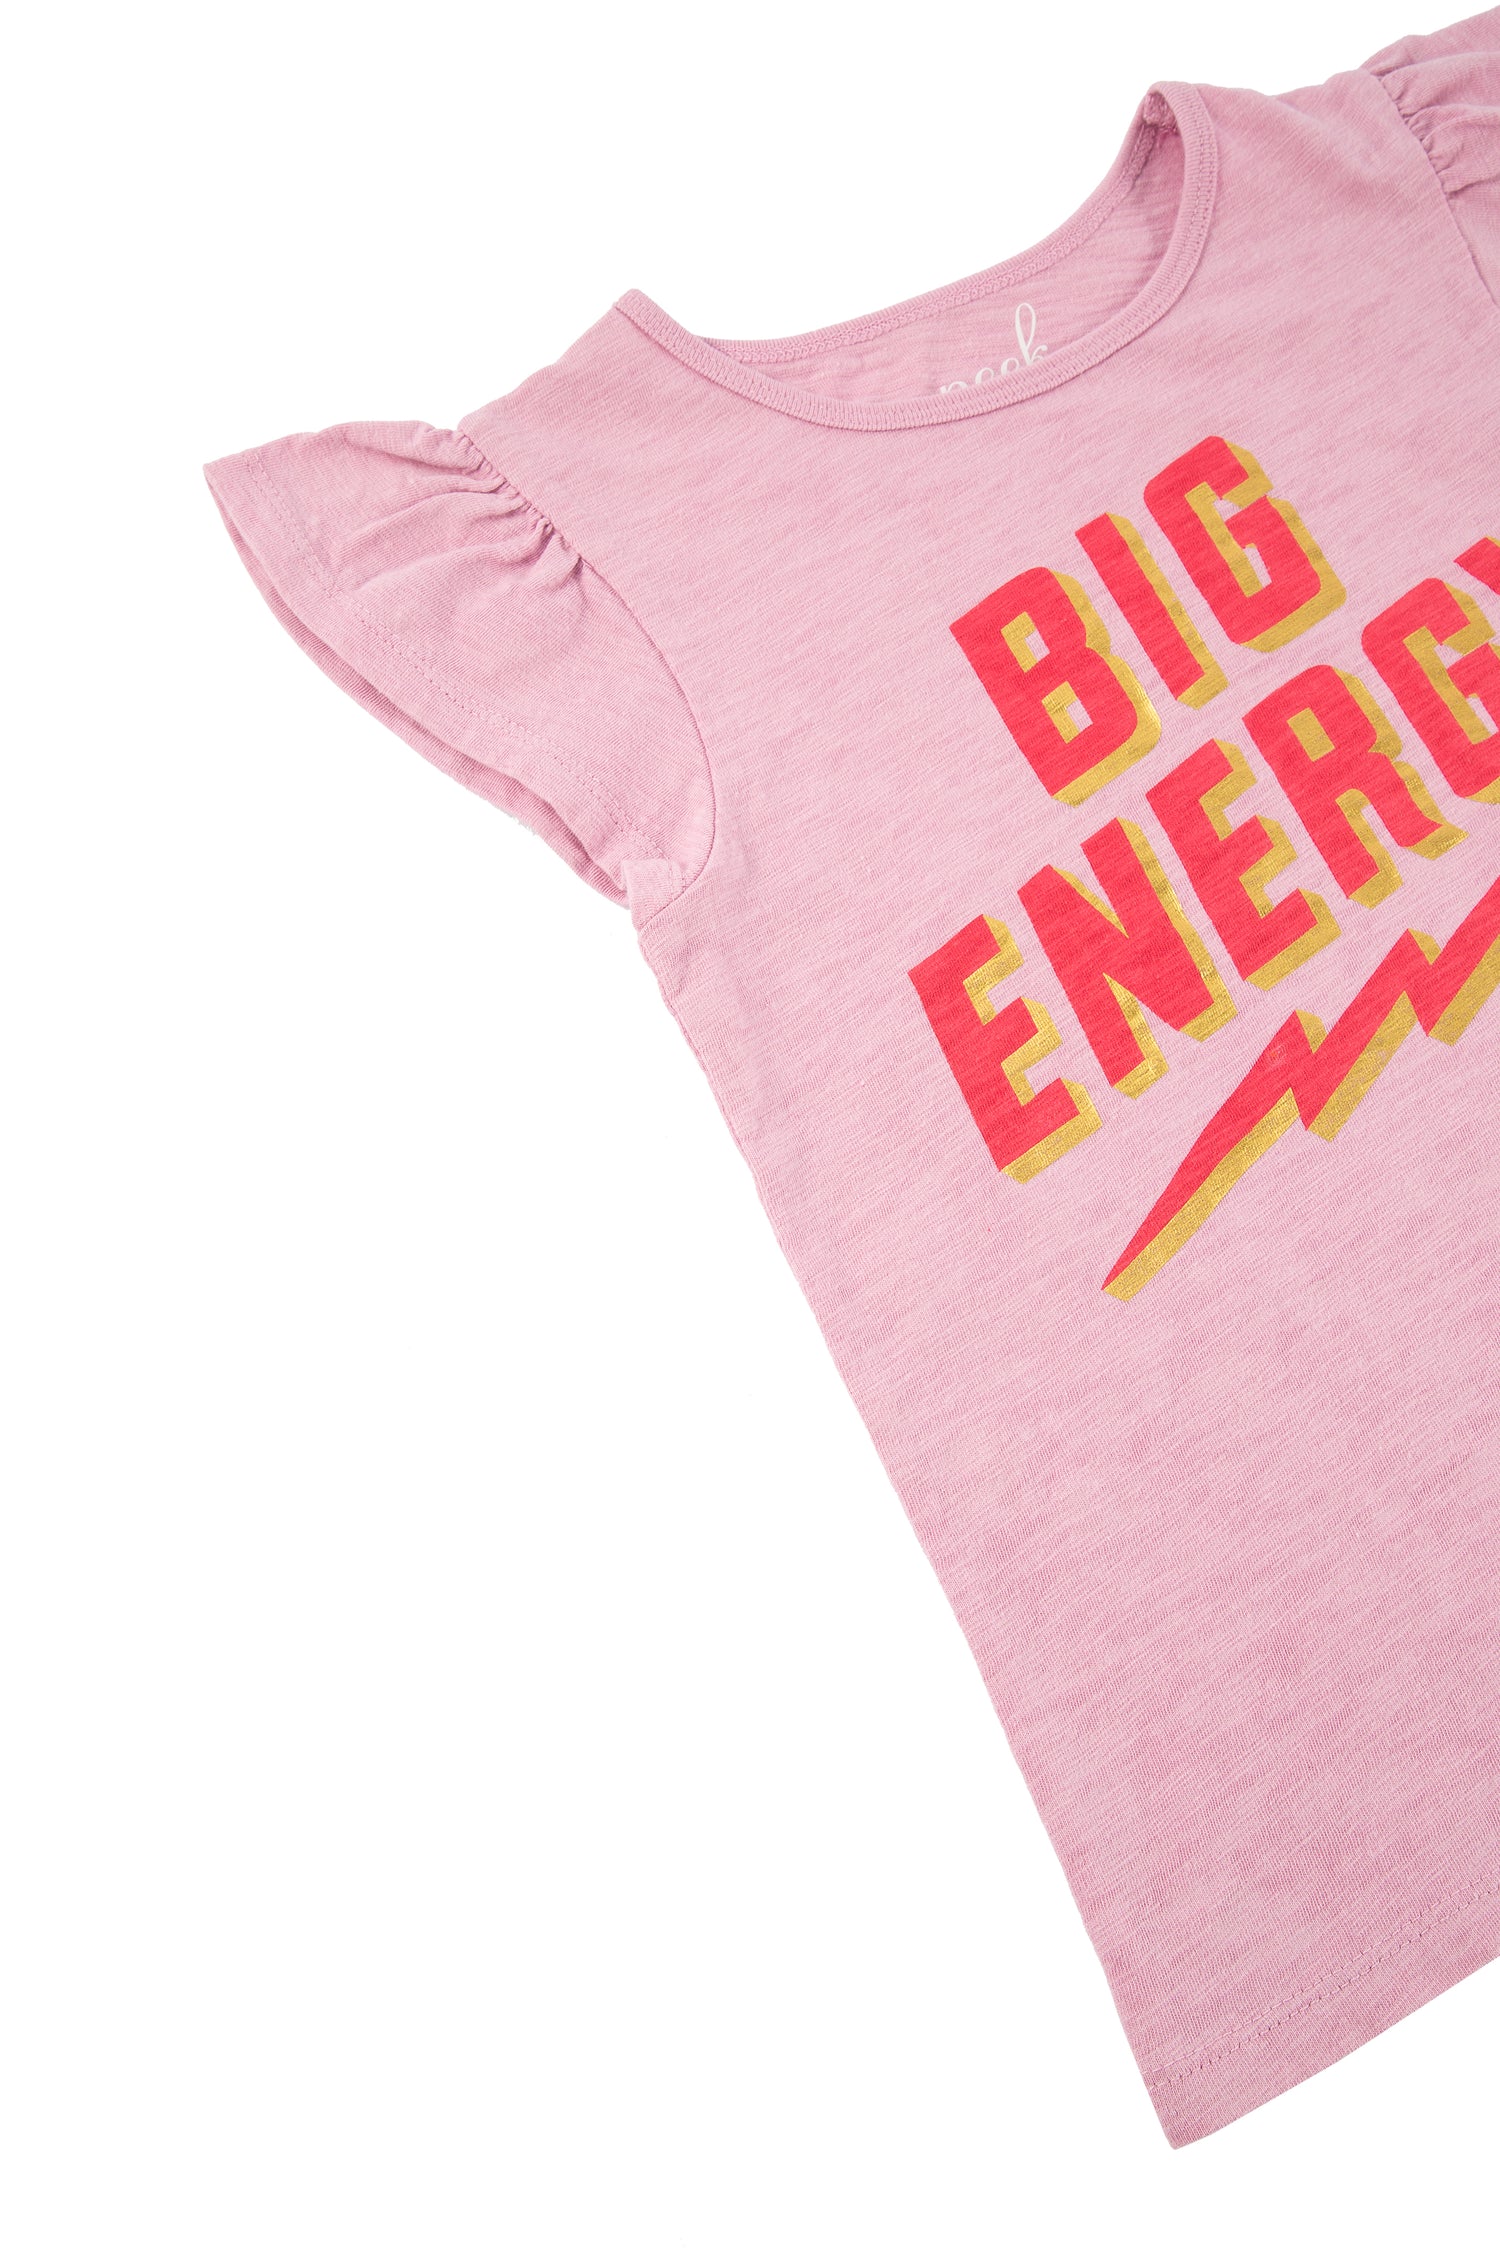 Close up of pink cut-off t-shirt with red 'big energy' text